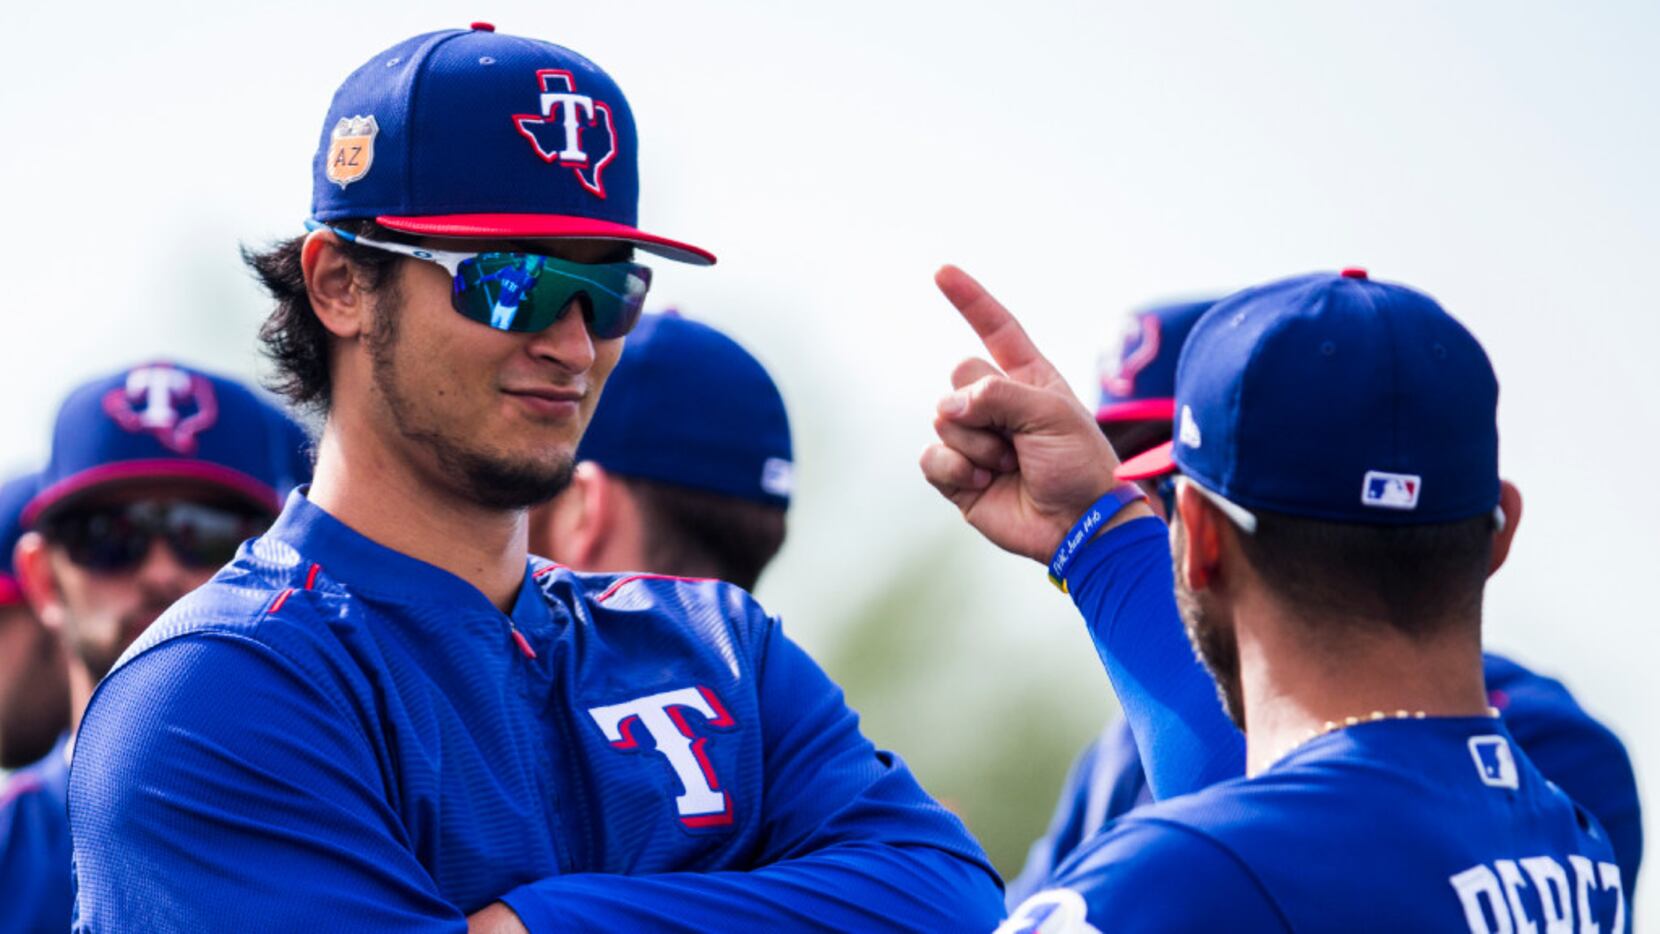 Rangers pitcher Yu Darvish's wife gives birth to baby boy